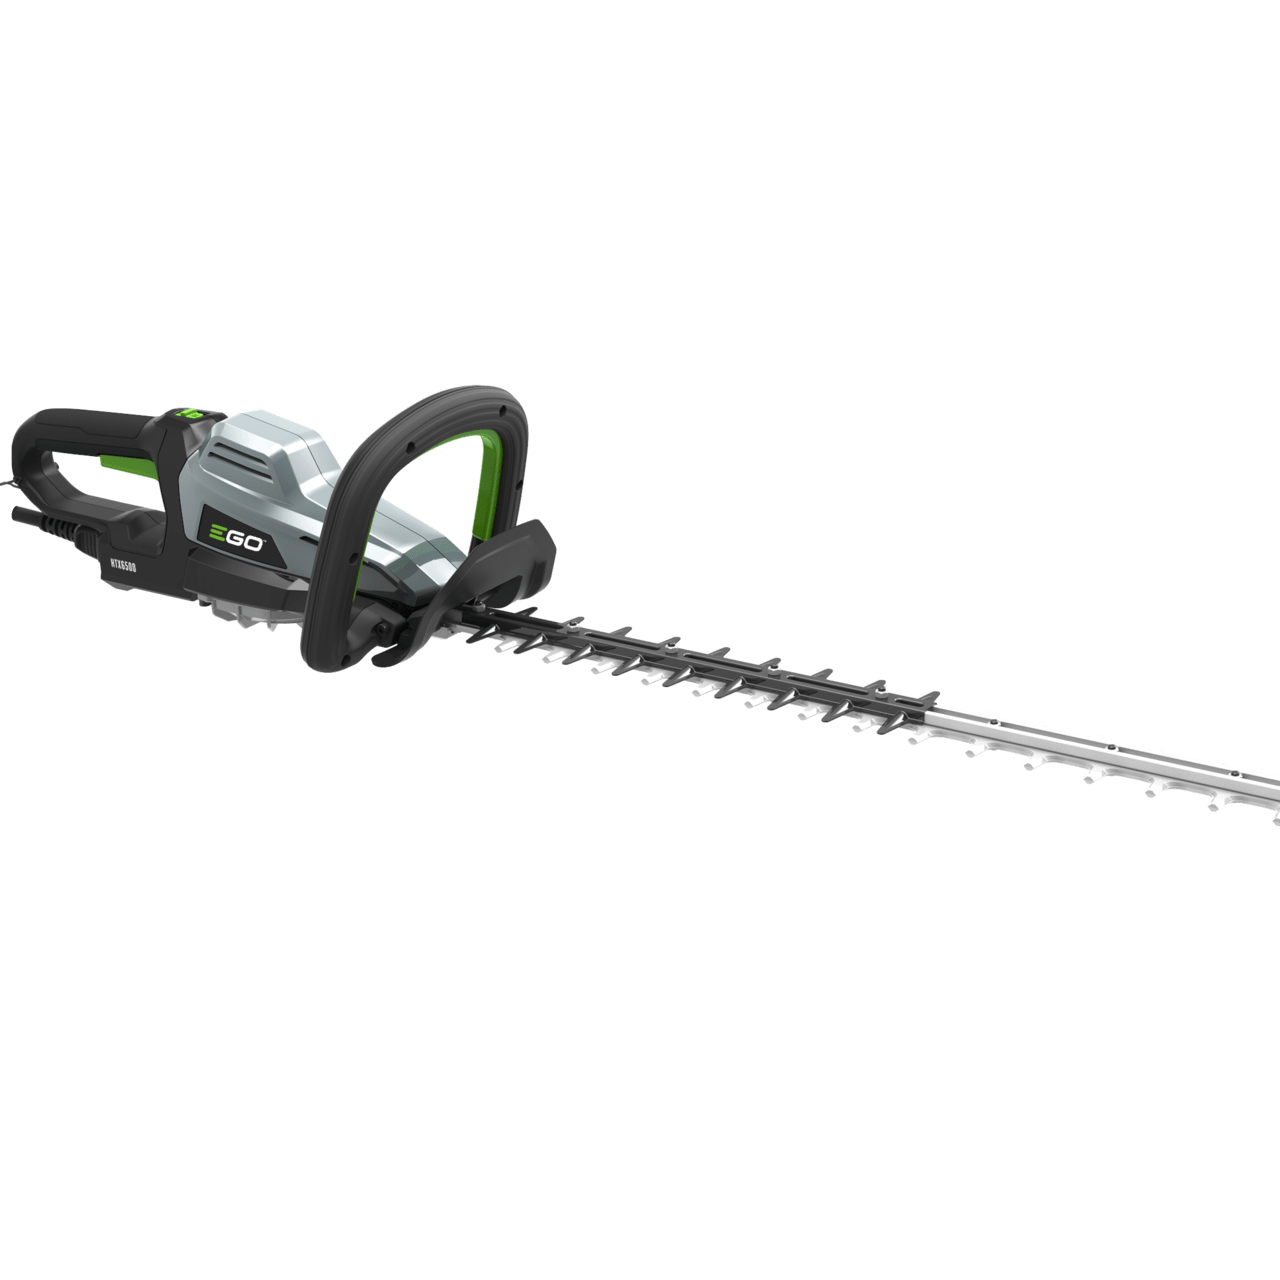 ego-htx6500-professional-x-hand-held-hedge-trimmer-65cm-bare-tool